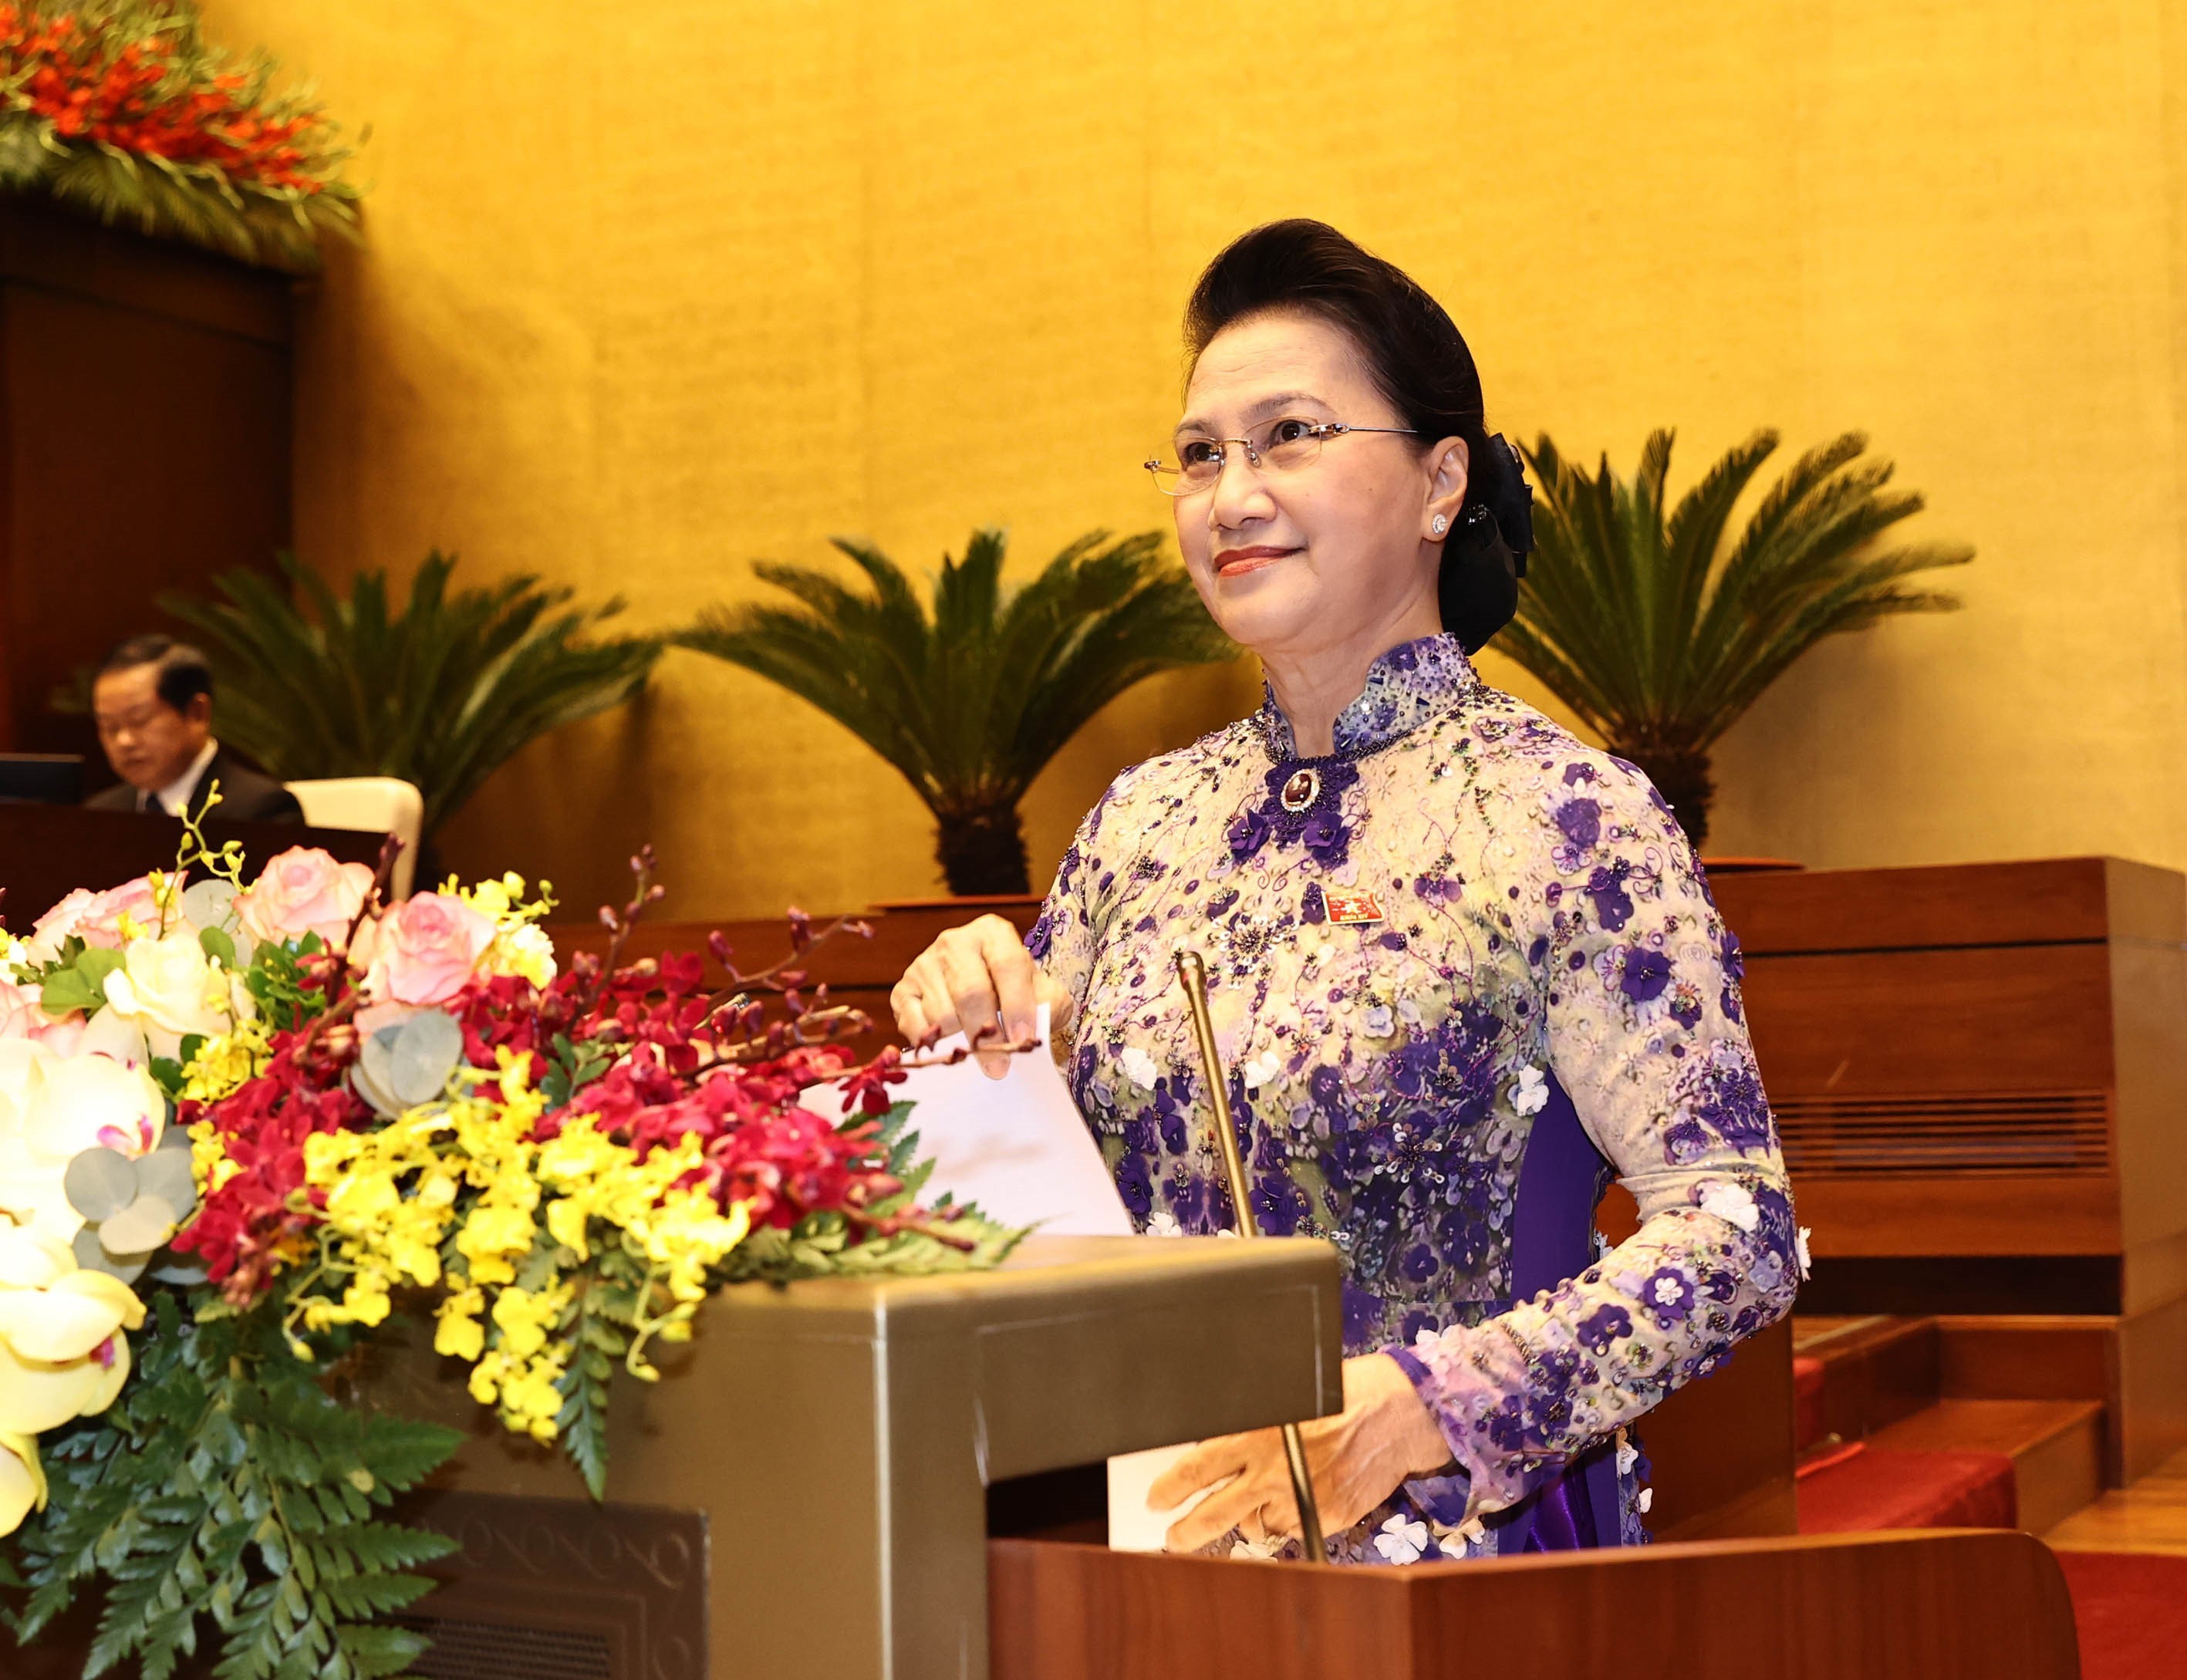 Vietnamese National Assembly Chairwoman Nguyen Thi Kim Ngan speaks at the opening session of the National Assembly’s 11th sitting in Hanoi, March 24, 2021. Photo: Vietnam News Agency